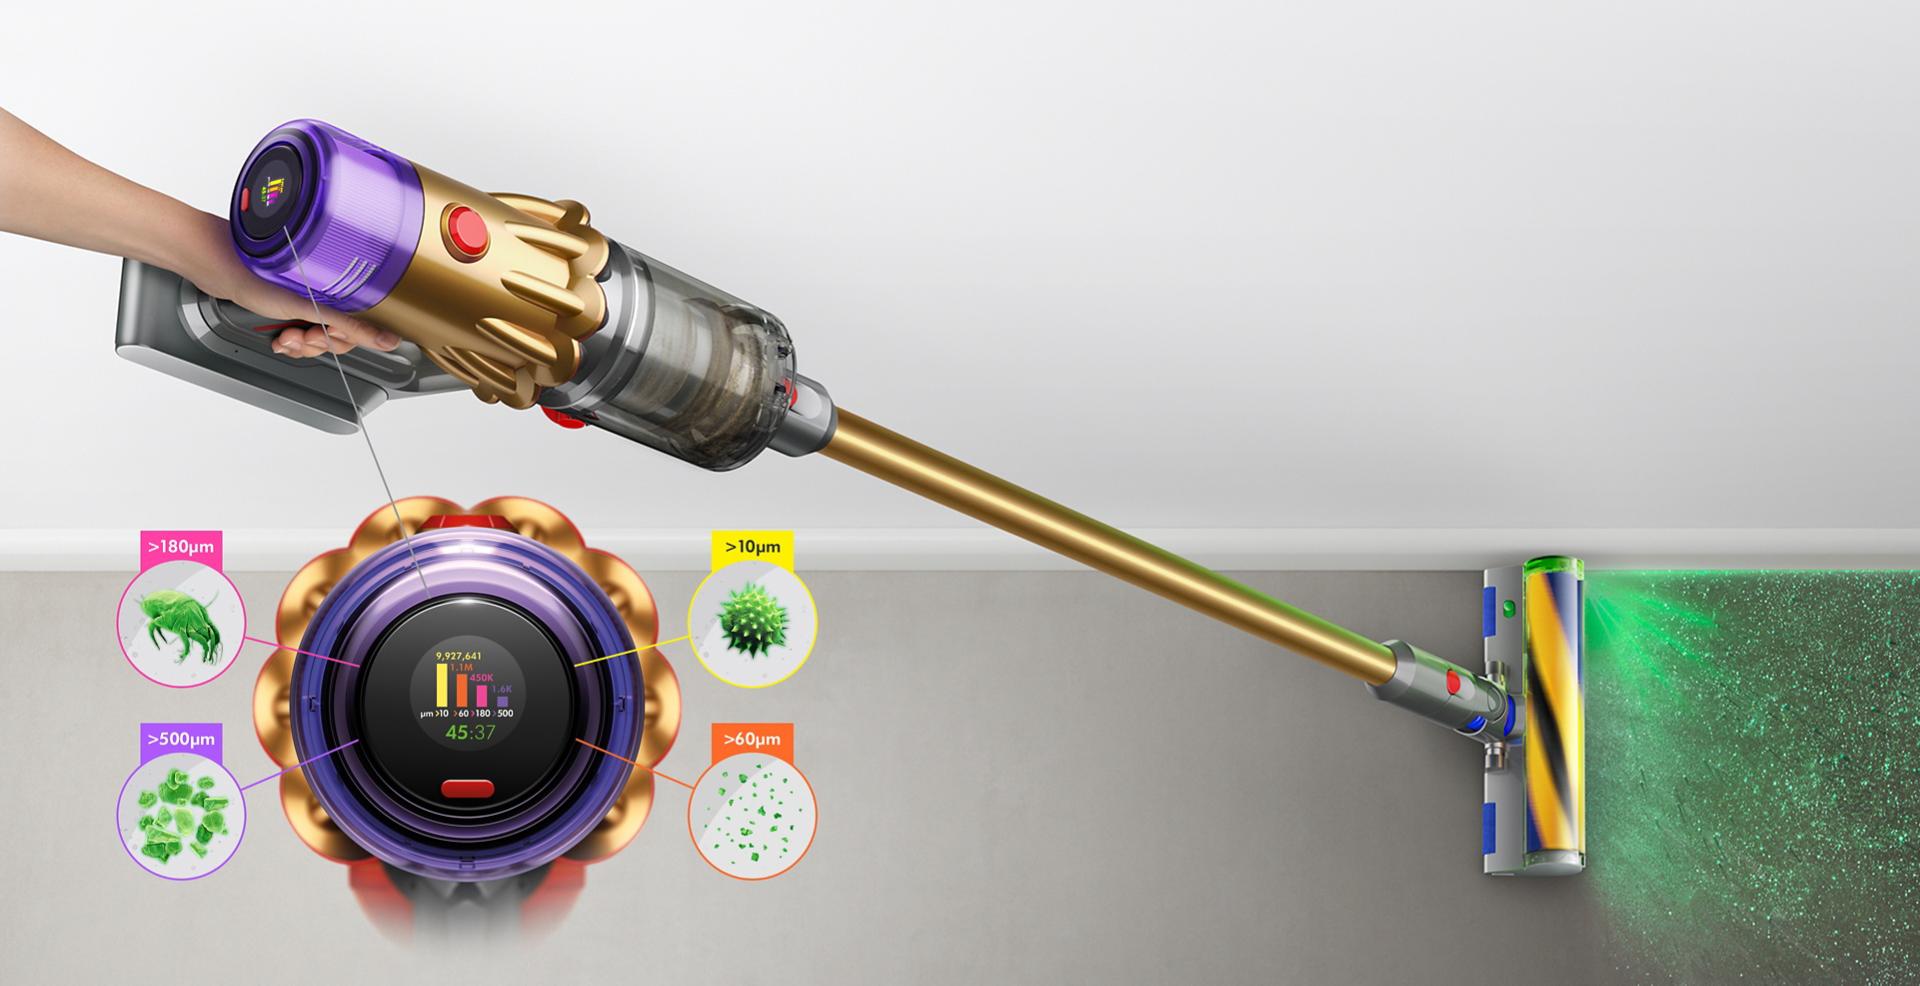 Dyson V12 Detect Slim vacuum with Slim Fluffy Laser cleaner head, showing sizes of dust detected